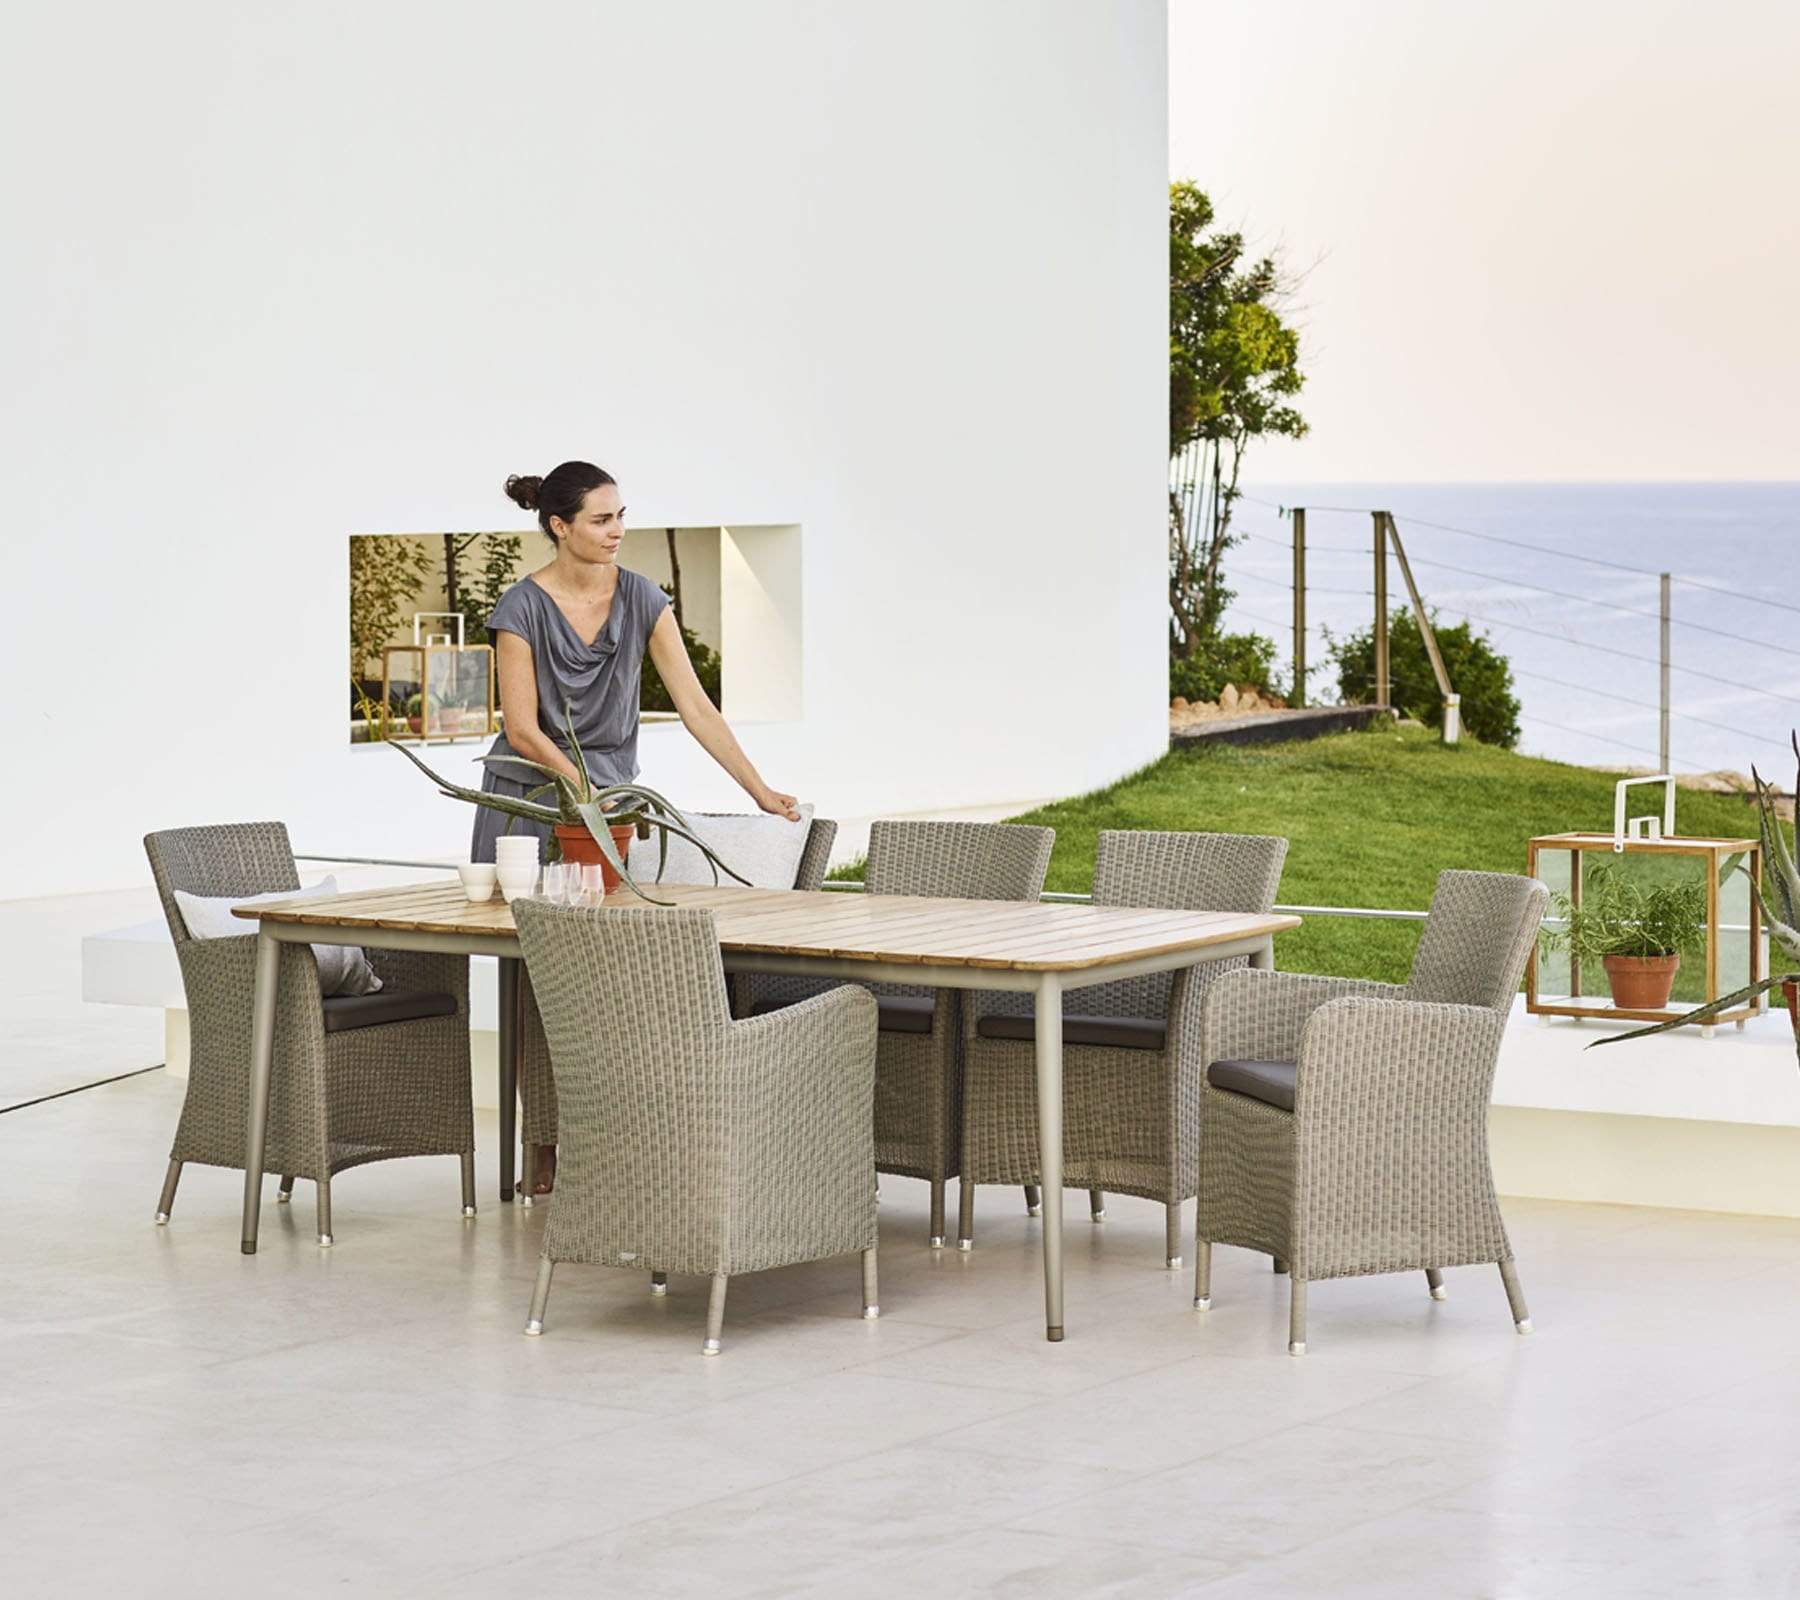 Boxhill's Hampsted Outdoor Dining Armchair lifestyle image with Core Garden Dining Table with a woman standing at the side, at patio